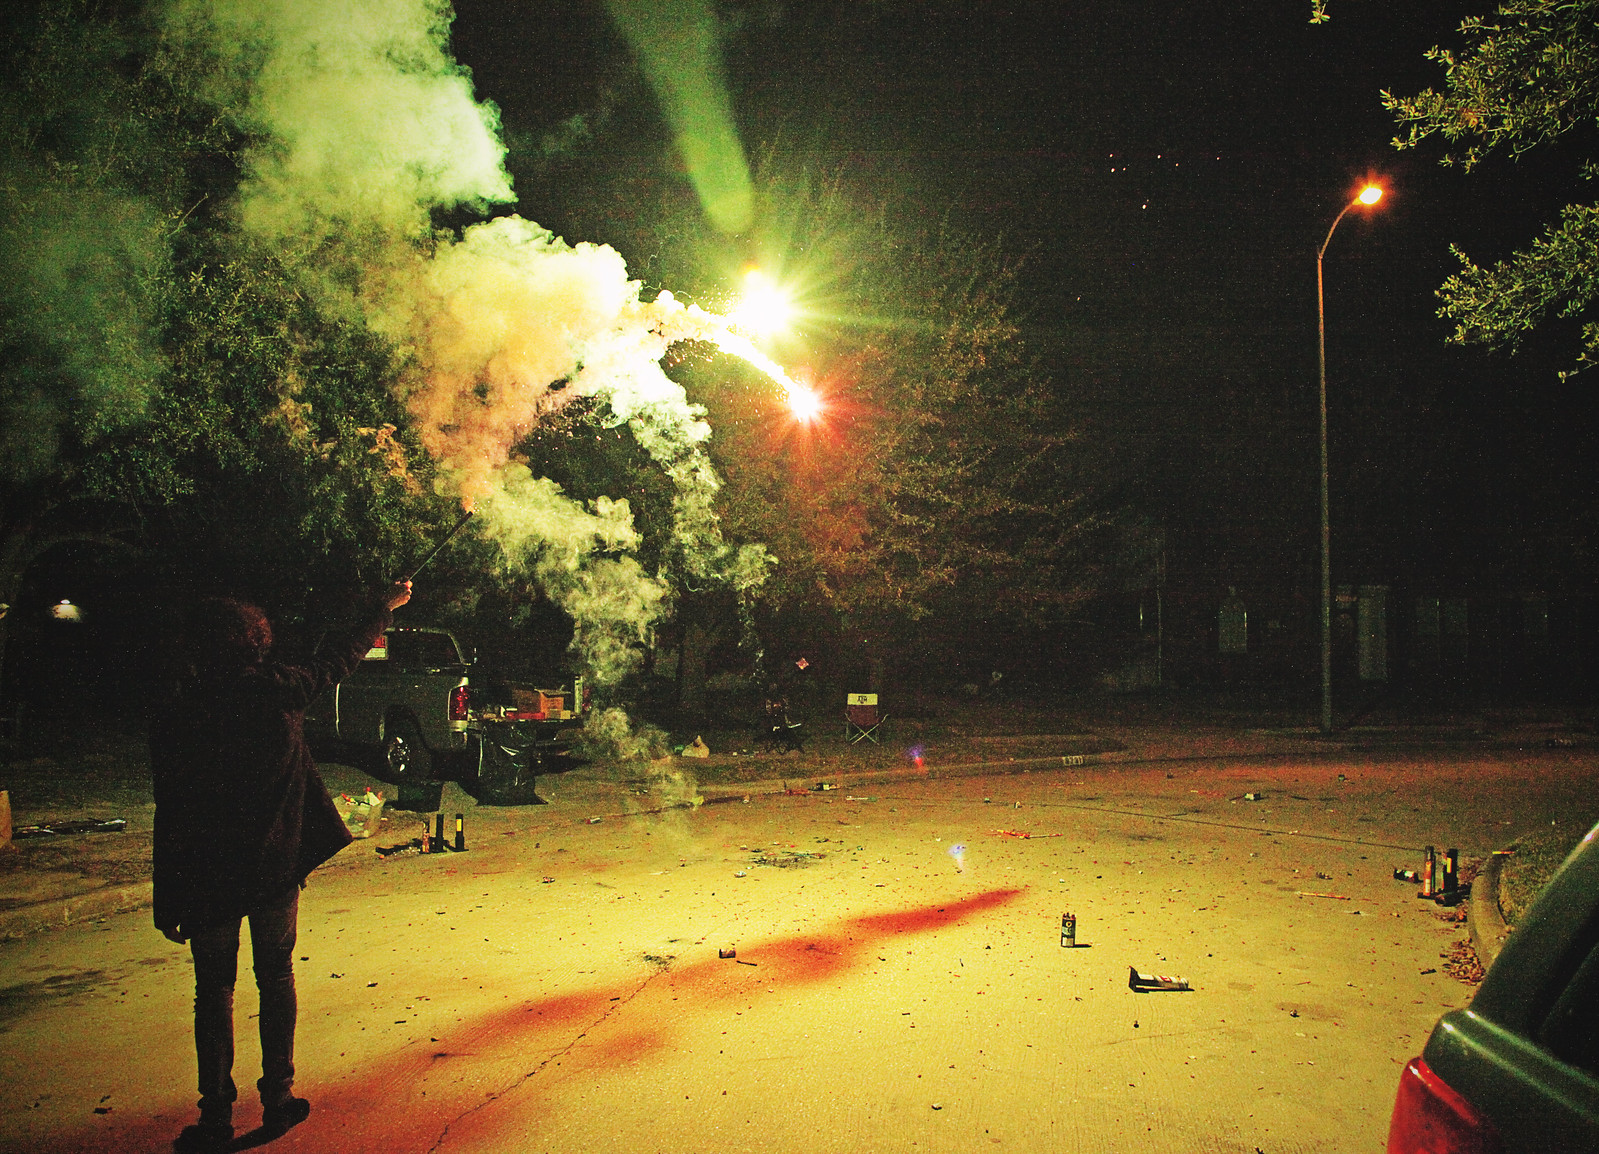 Otto with fireworks on New Years Eve 2013 by Heather Phillips on Flickr